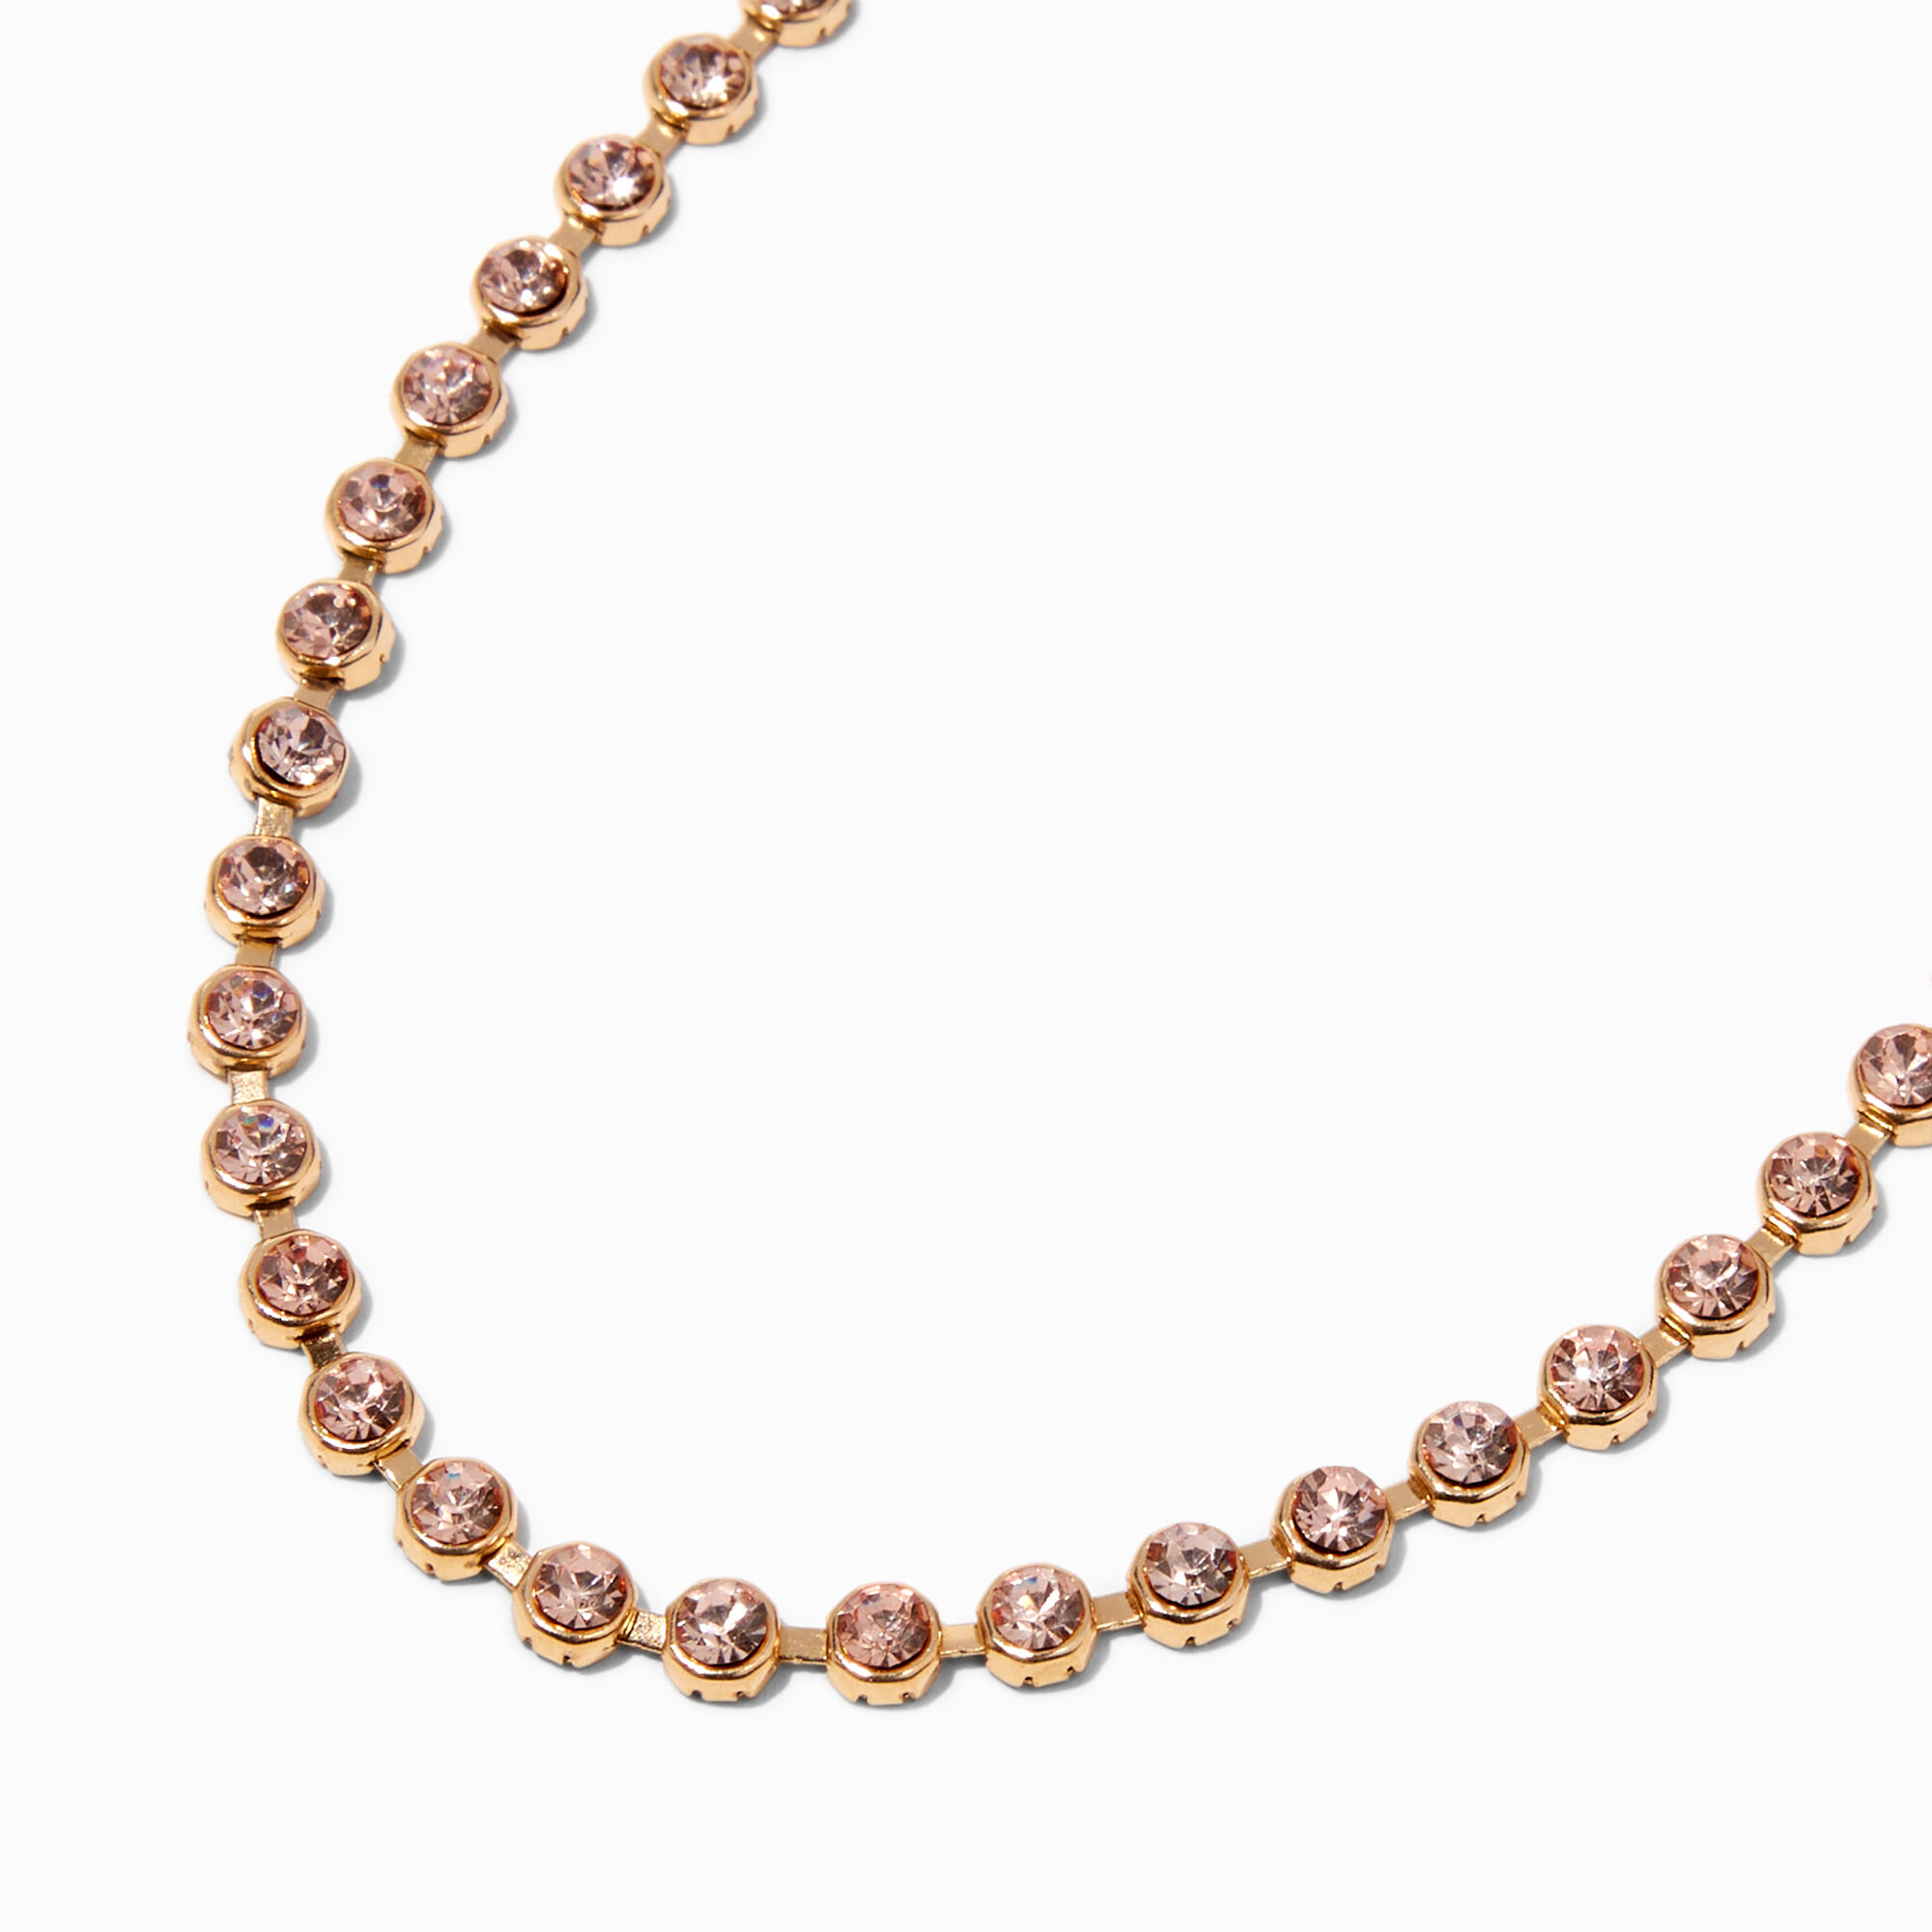 View Claires Club Rhinestone Gold Necklace Pink information